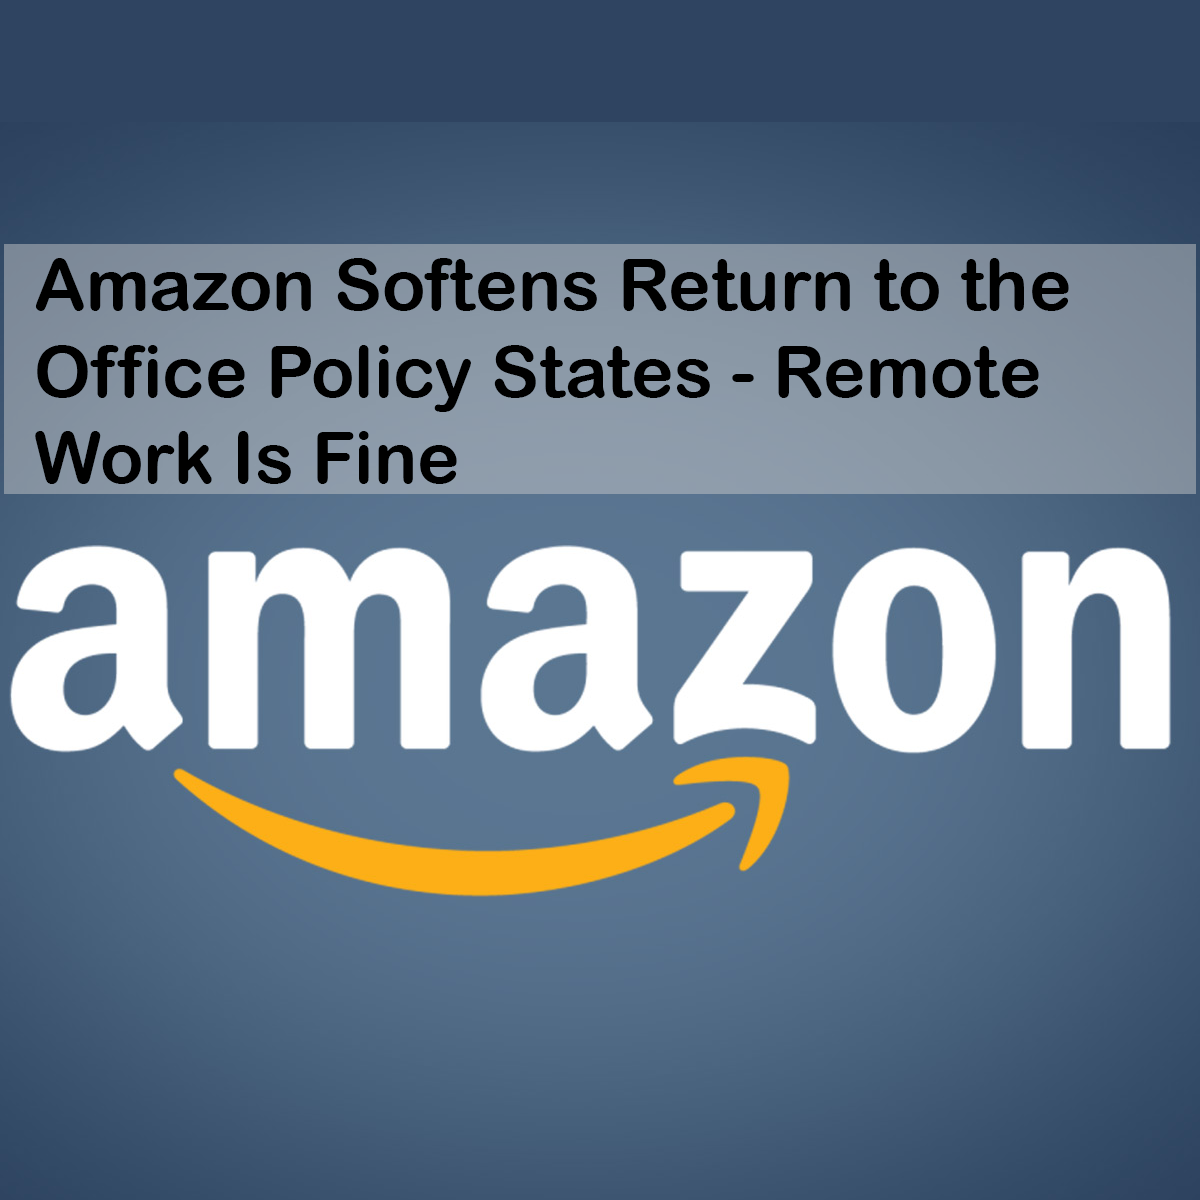 Amazon Softens Return to the Office Policy States - Remote Work Is Fine